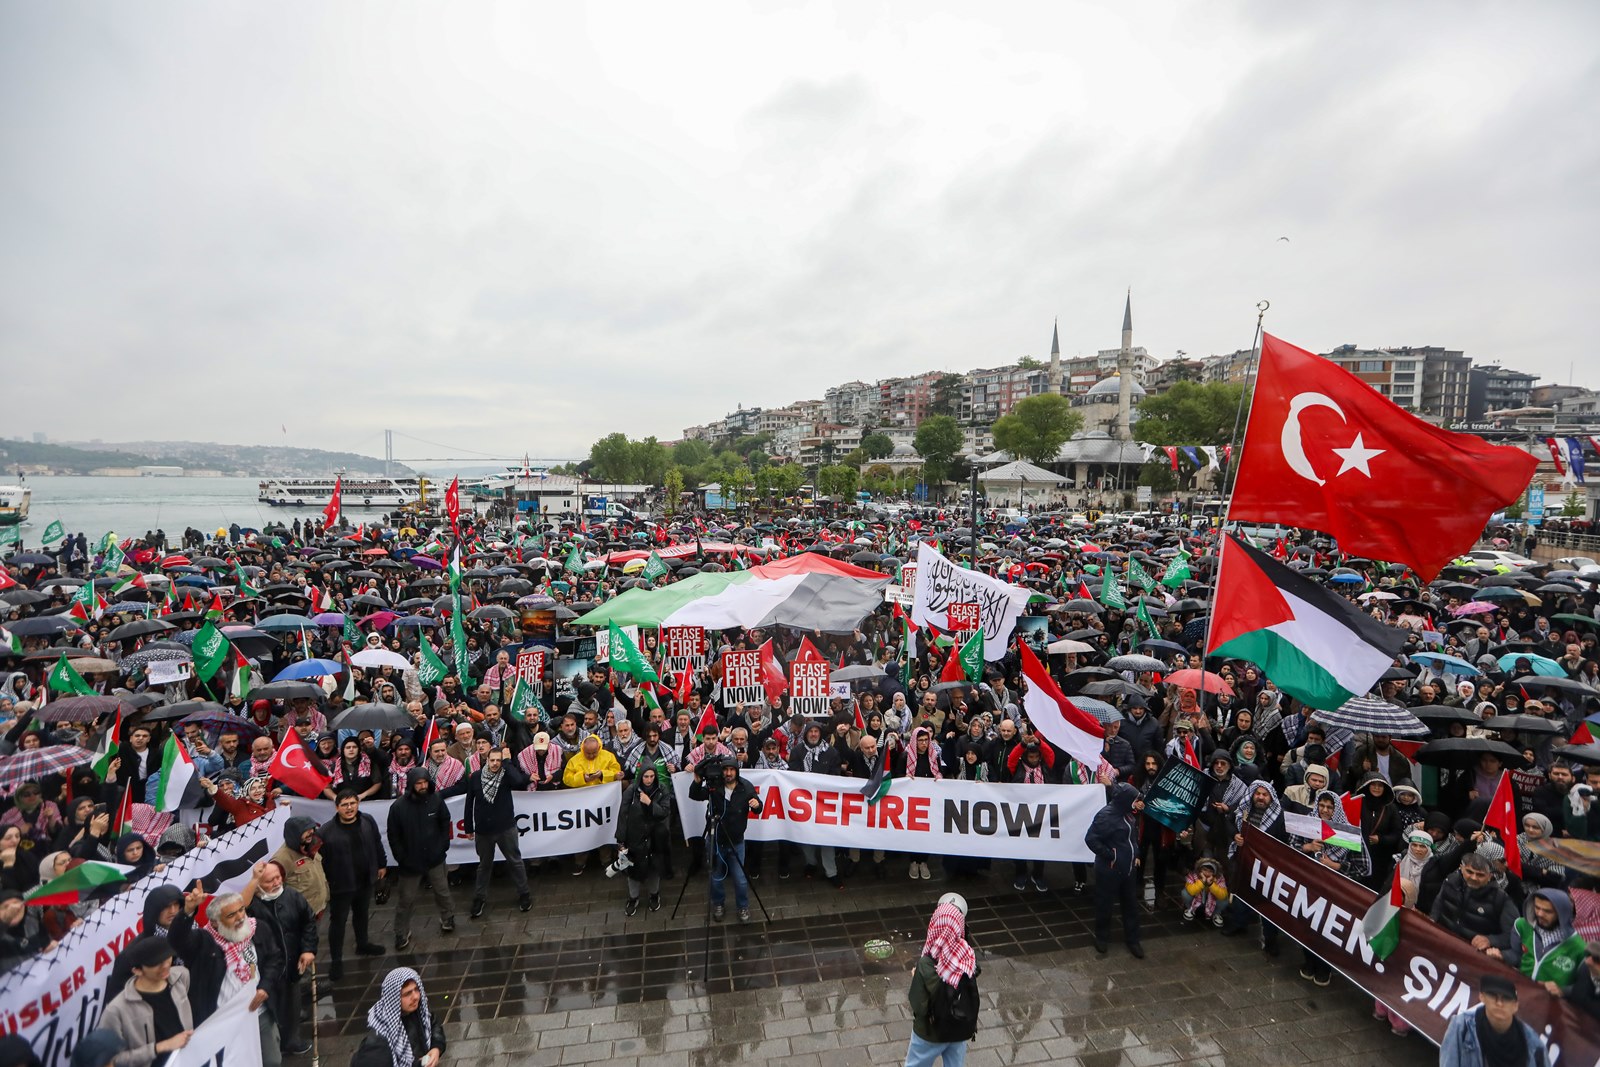 Tens of thousands participated in the March for Palestine in Üsküdar